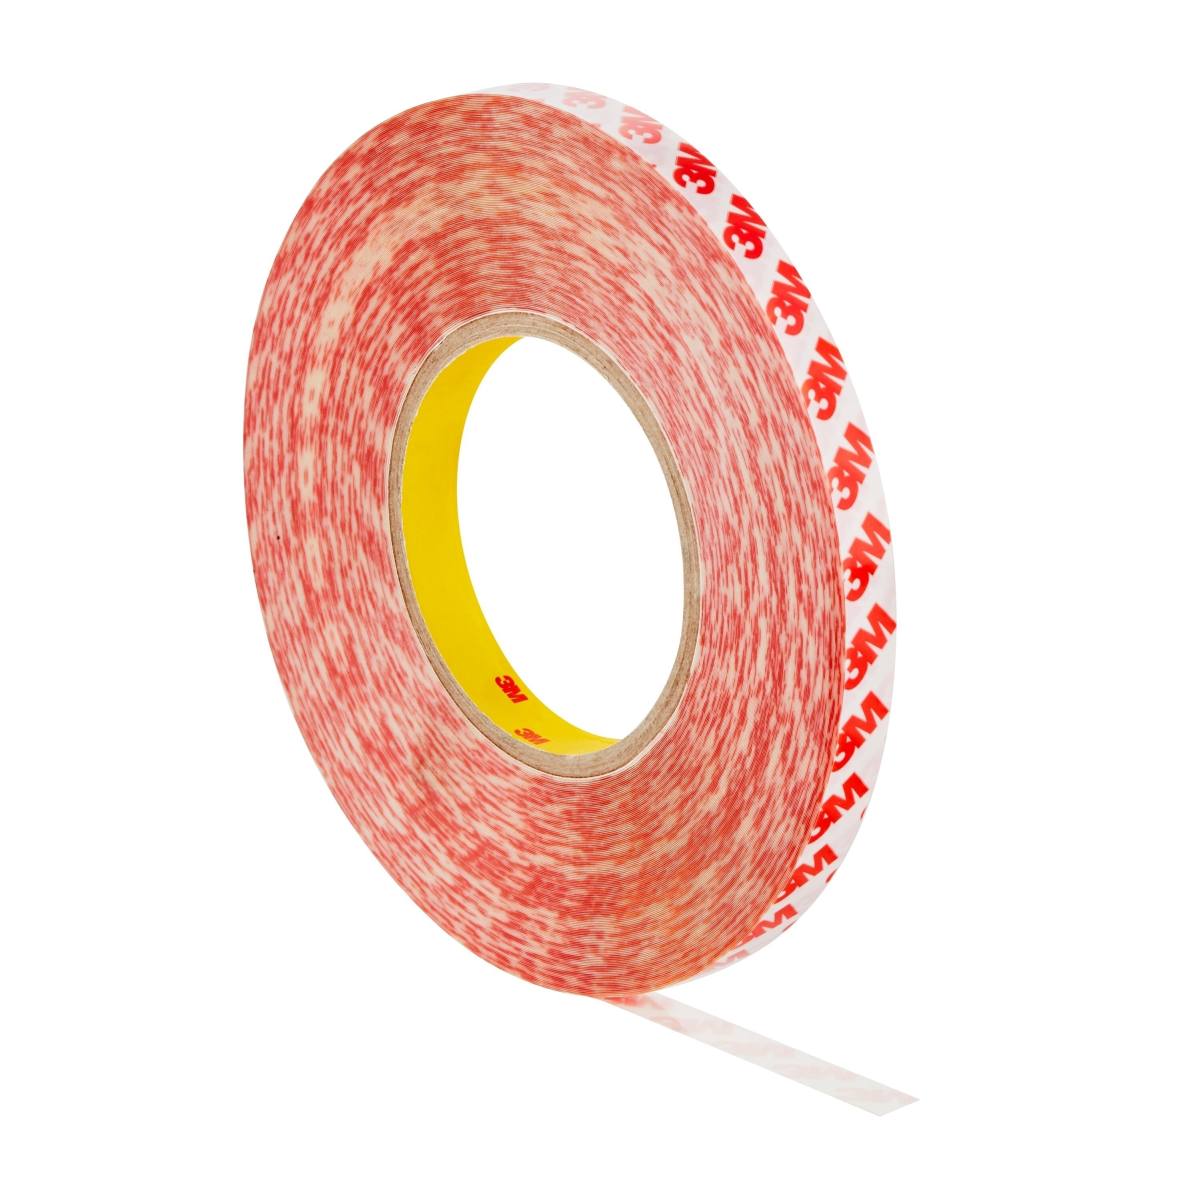 3M Double-sided adhesive tape with polyester backing GPT-020F, transparent, 6 mm x 50 m, 0.202 mm